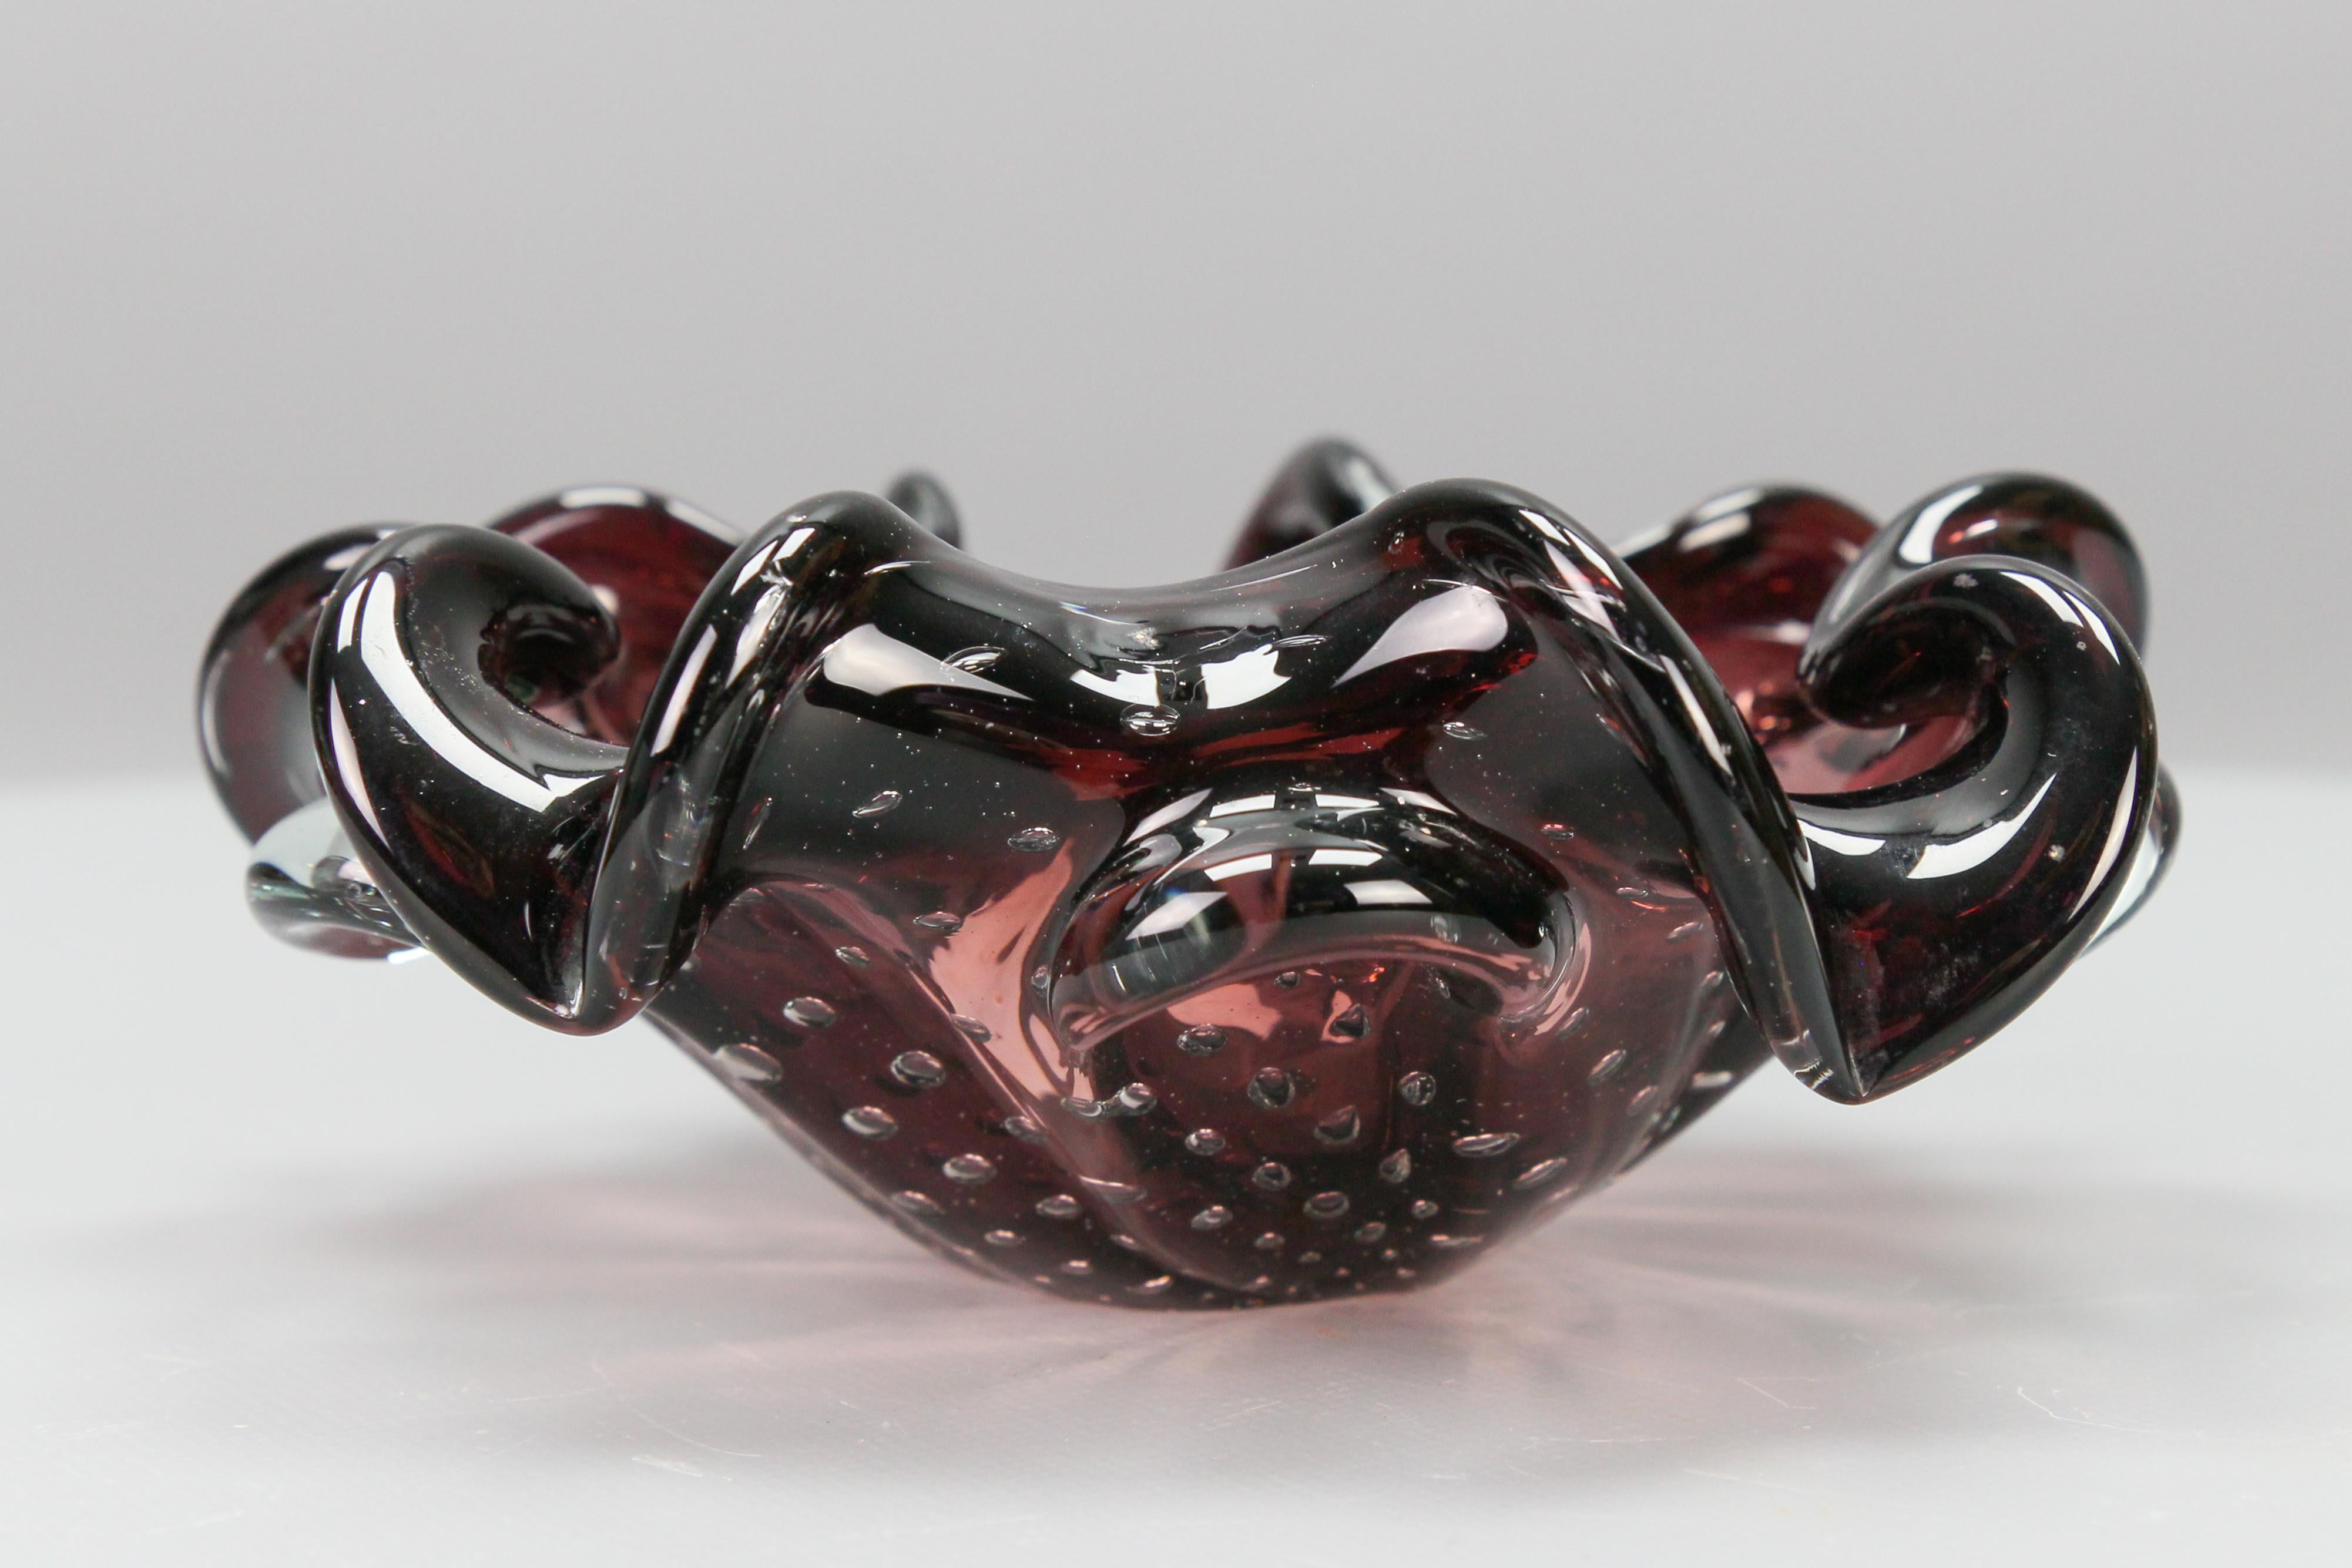 Mid-Century dark purple Murano bubble glass bowl, Italy, circa the 1960s.
A gorgeous handblown Murano art glass sculptural bowl in purple and clear glass with a controlled bubble effect. Can be used as a candy dish, business card holder, decorative